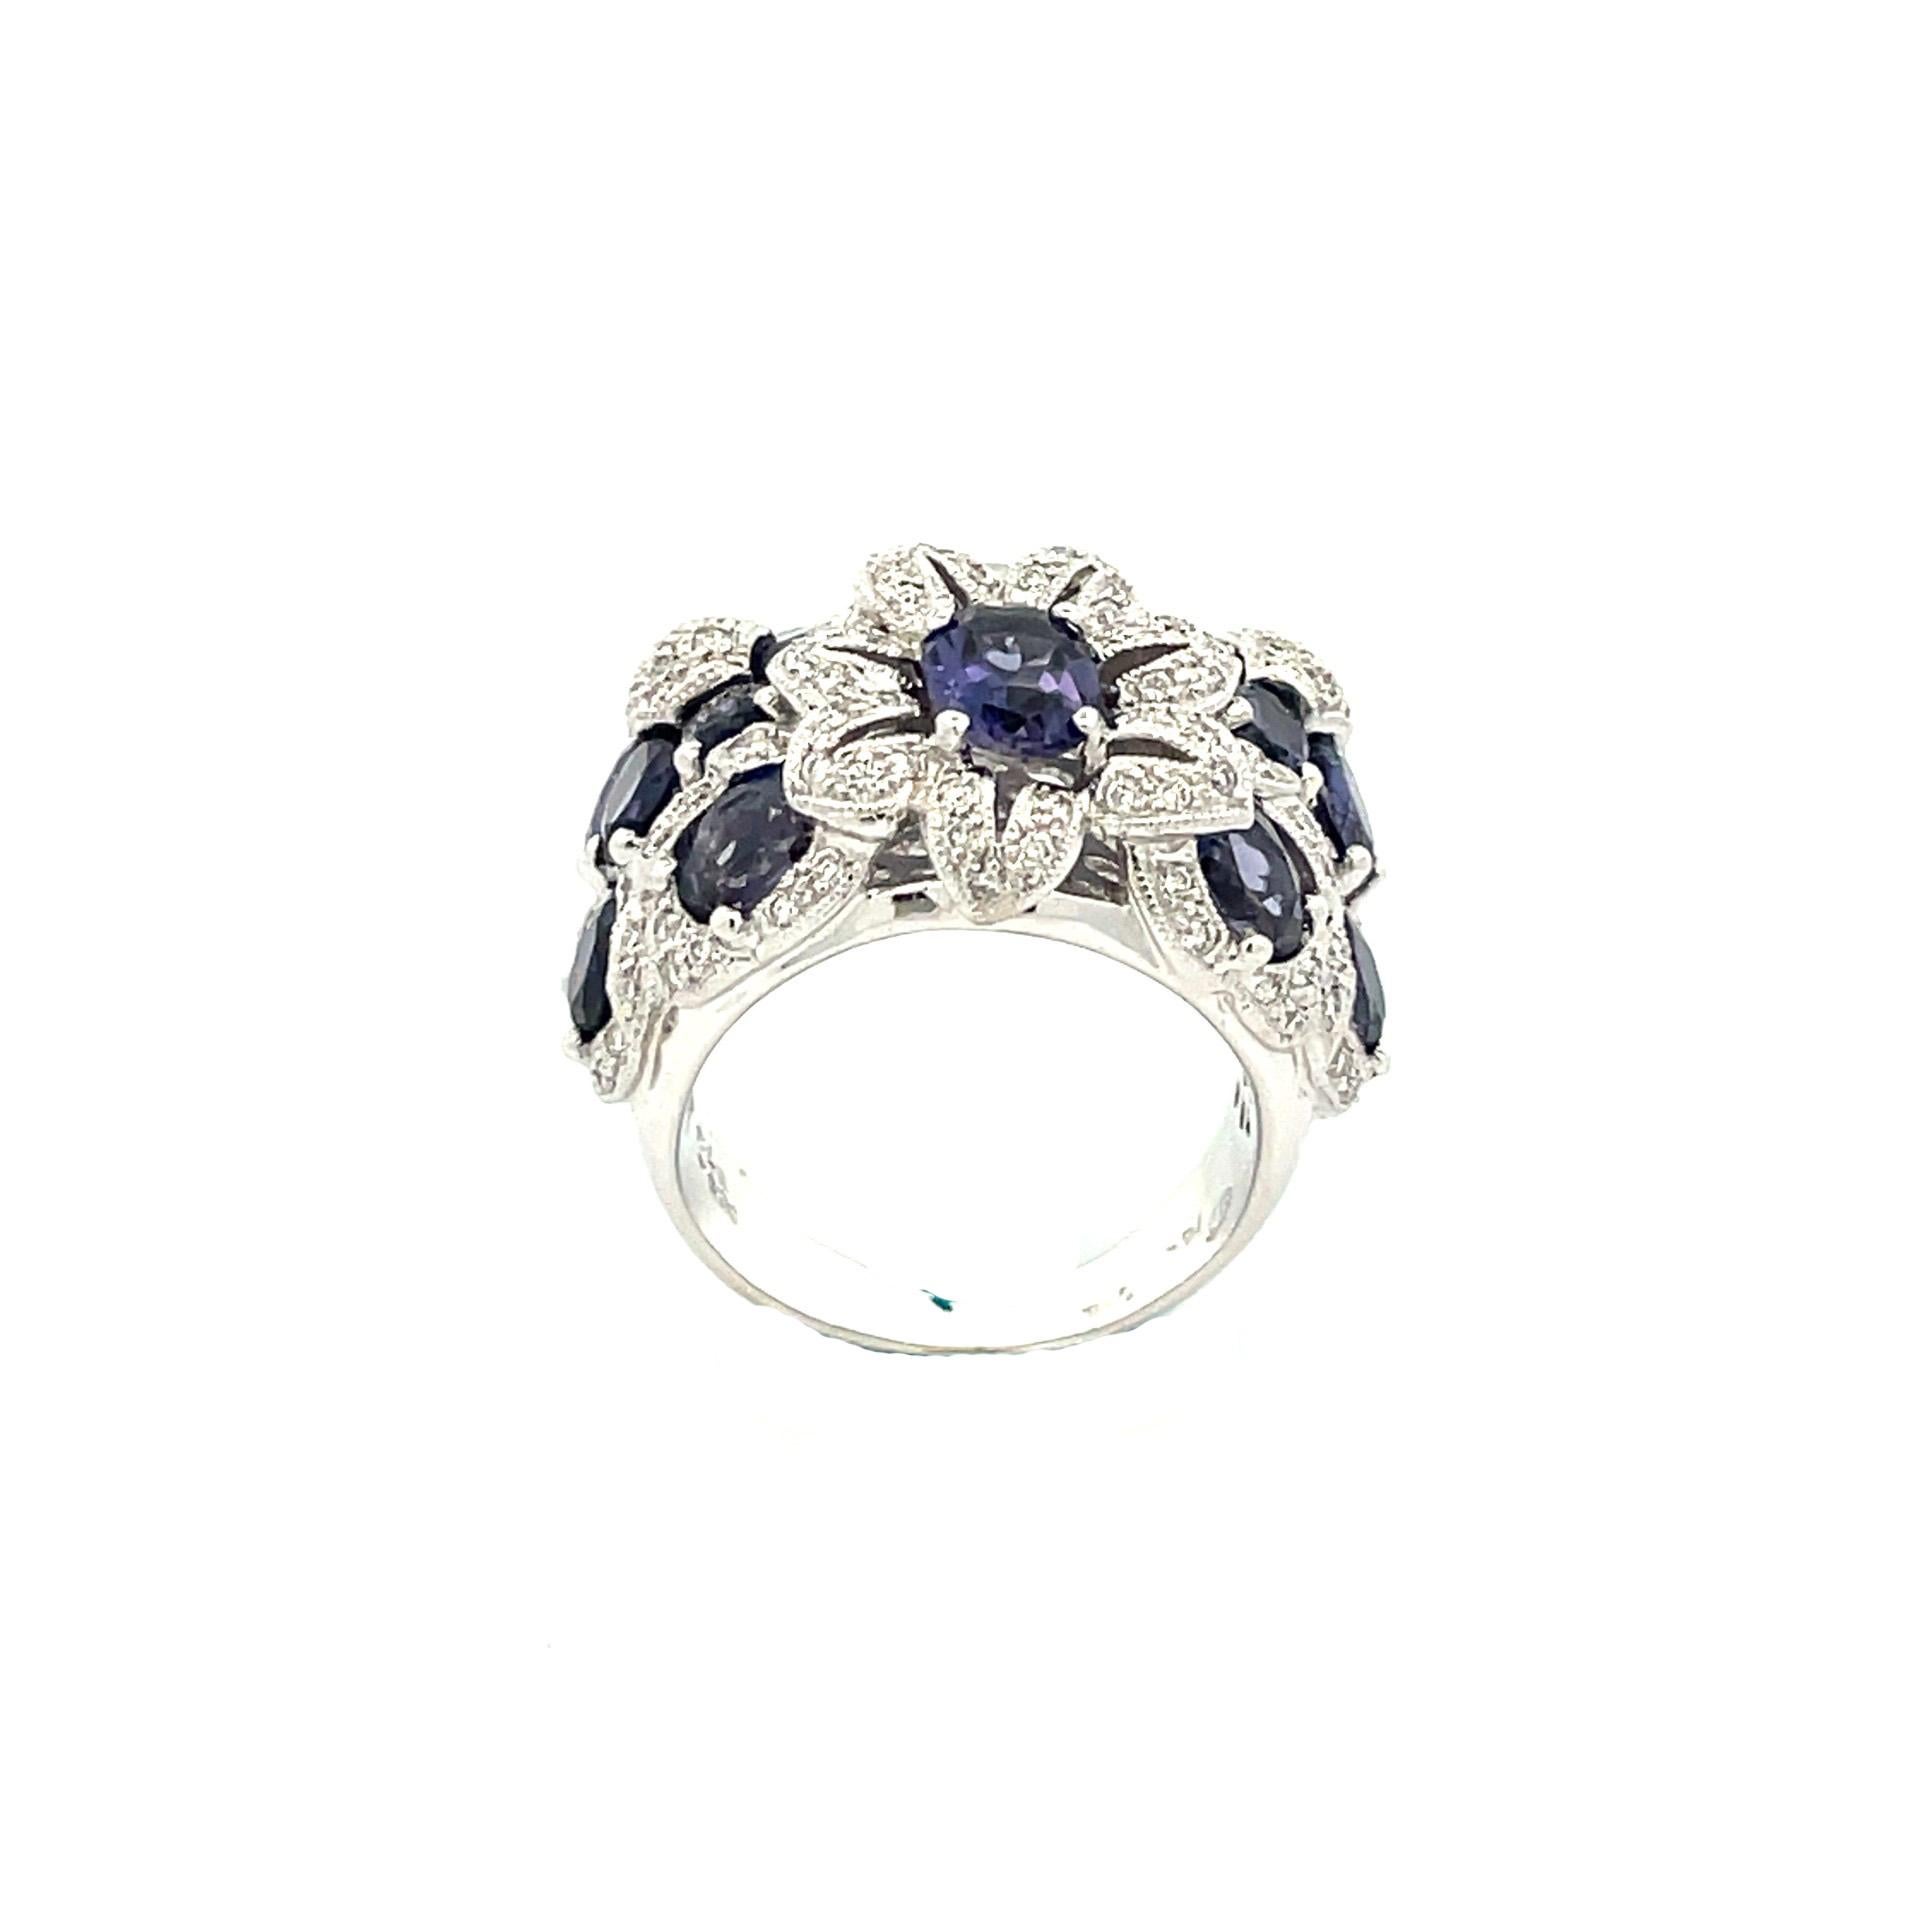 A flower bouquet cluster ring crafted in 18 karat white gold with natural iolite and natural round brilliant cut diamonds. 

18 natural iolite 5.92ct total weight

95 brilliant cut natural diamonds .60ct total weight

18kt white gold weighing 14.40